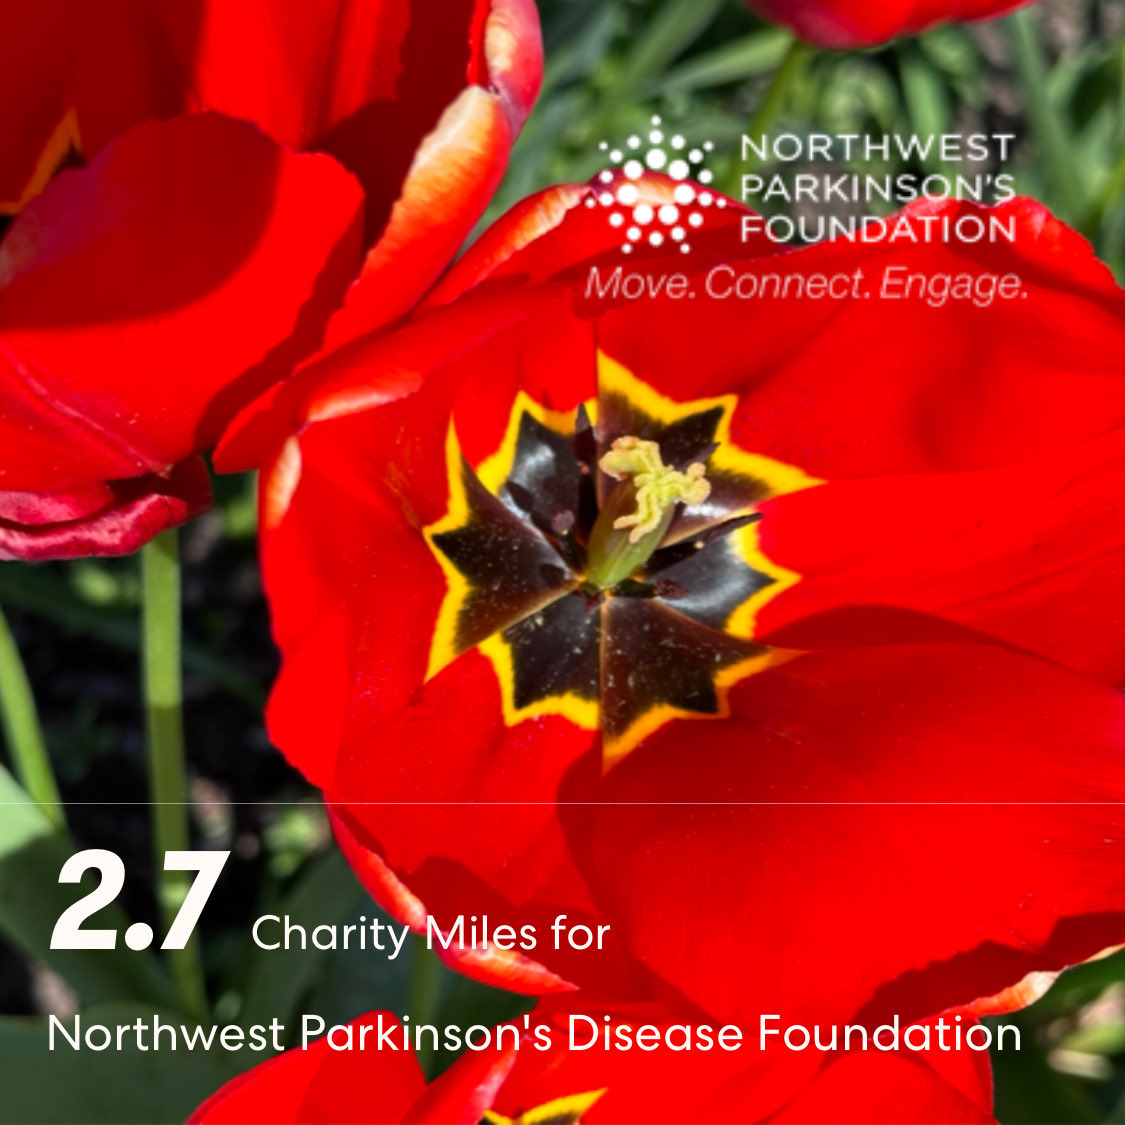 In #Seattle, 2.7 ⁦@CharityMiles⁩ for ⁦@NWParkinsons⁩ . I’d be grateful for your support. If you’re in a position to do so, please click here to sponsor me for #WalkForParkinsons:

nwpf.donordrive.com/participant/Gr…